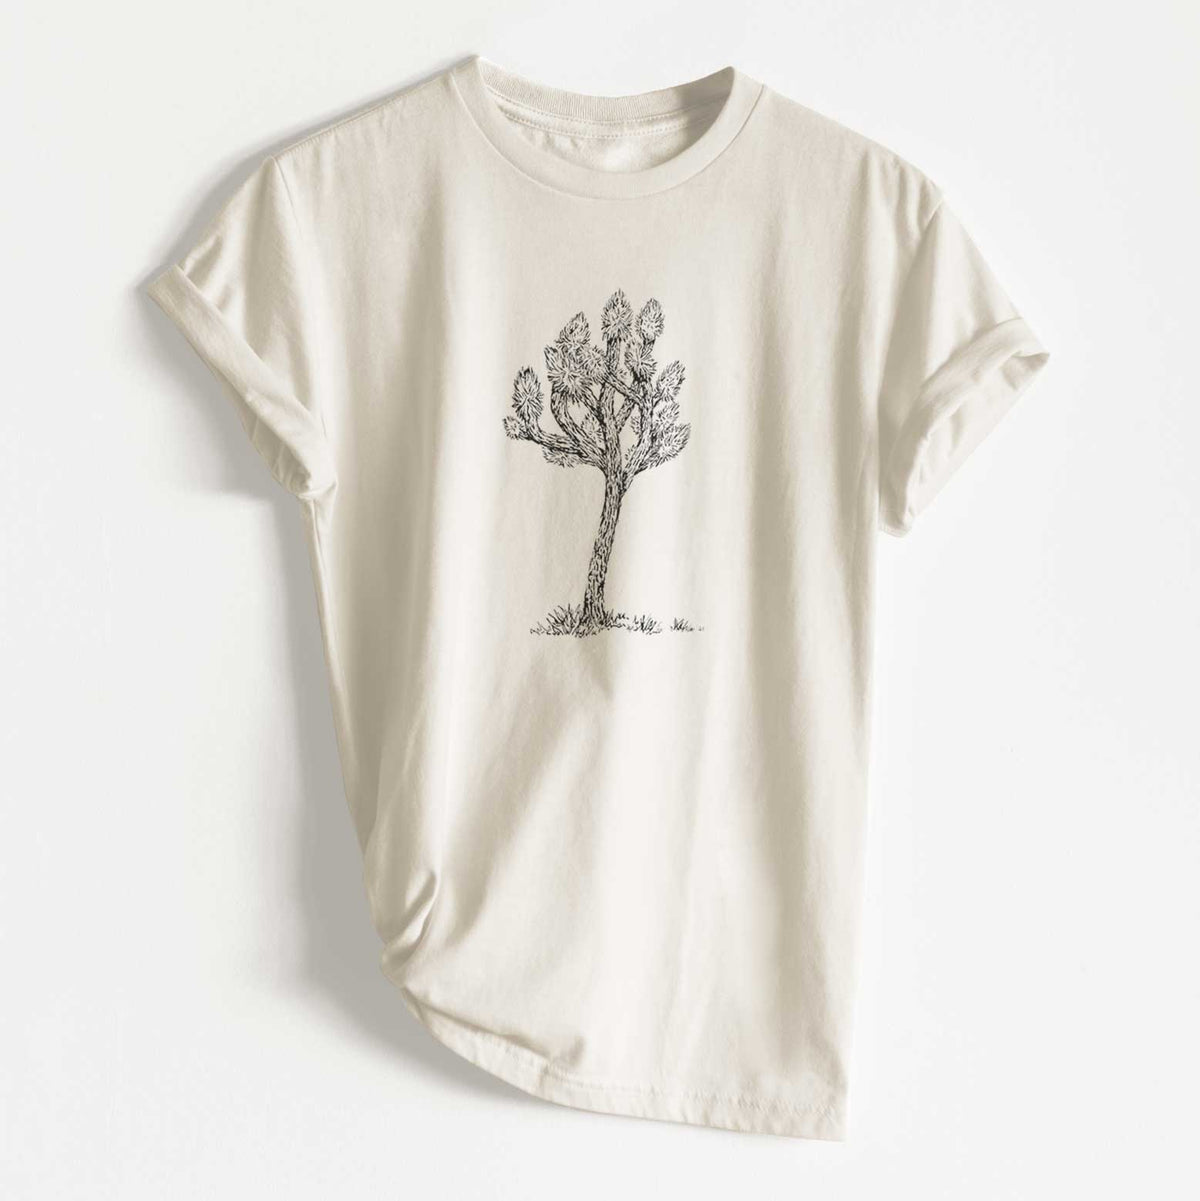 Yucca brevifolia - Joshua Tree - Unisex Recycled Eco Tee  - CLOSEOUT - FINAL SALE